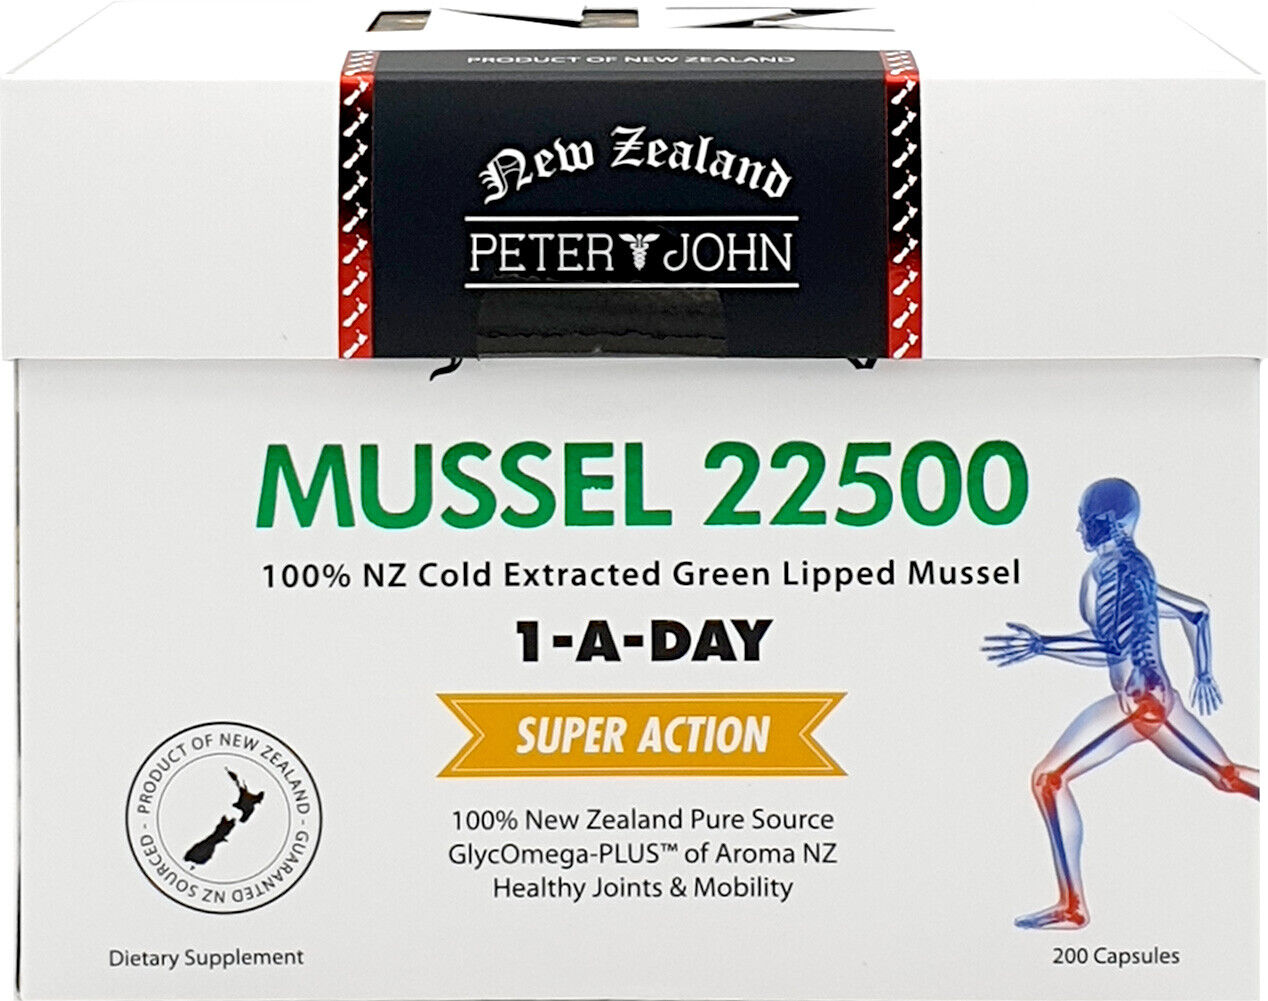 Peter&John New Zealand Green Lipped Mussel 22500 200capsule Joint support